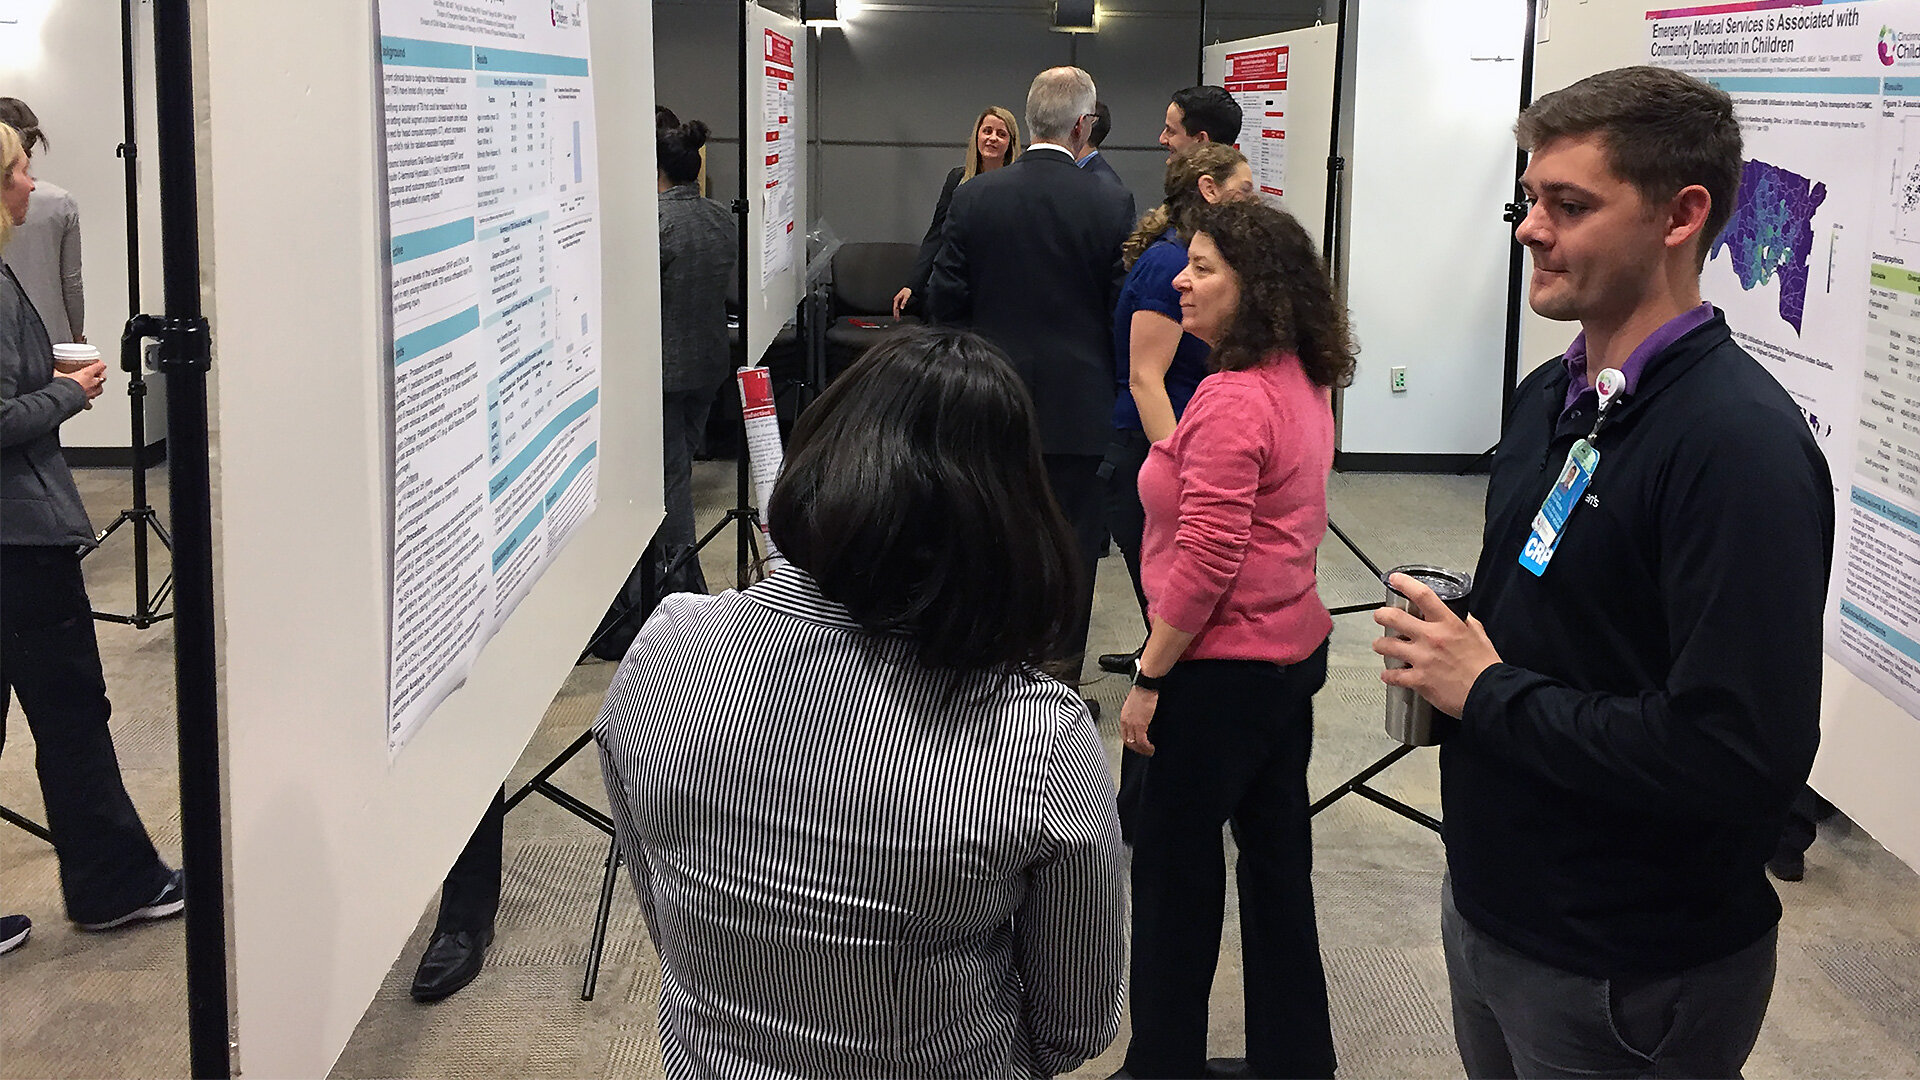  Symposium attendees viewing an academic poster.  